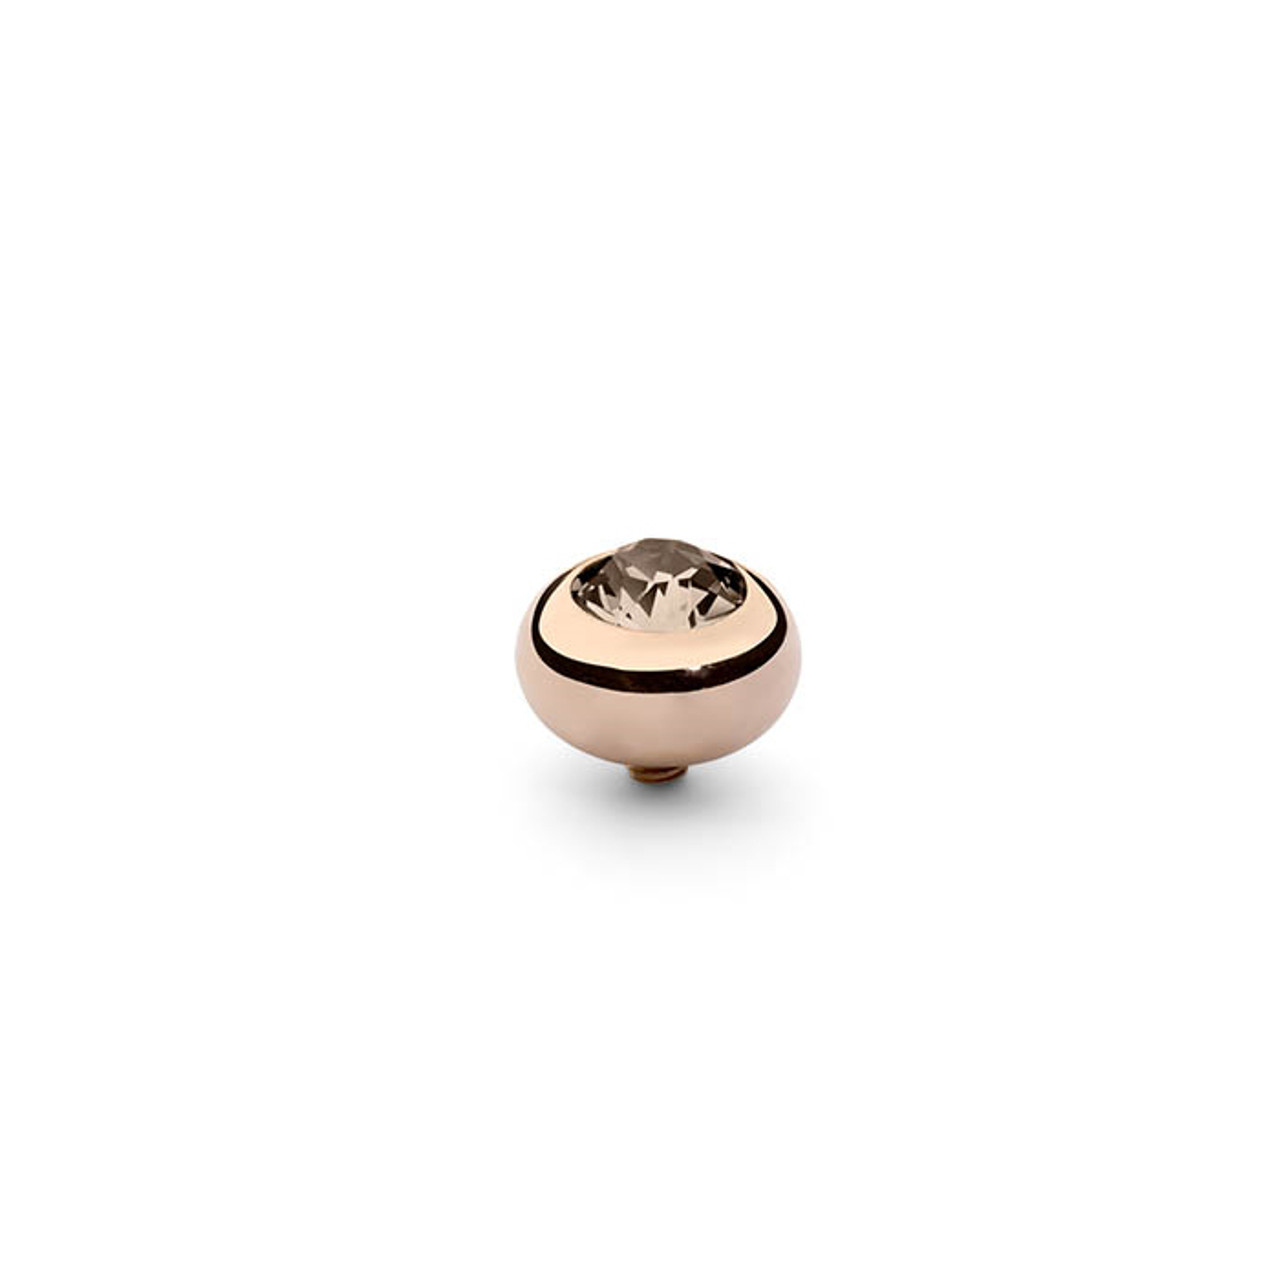 Silk Rose Gold Interchangeable by Qudo Jewelry - The Stand